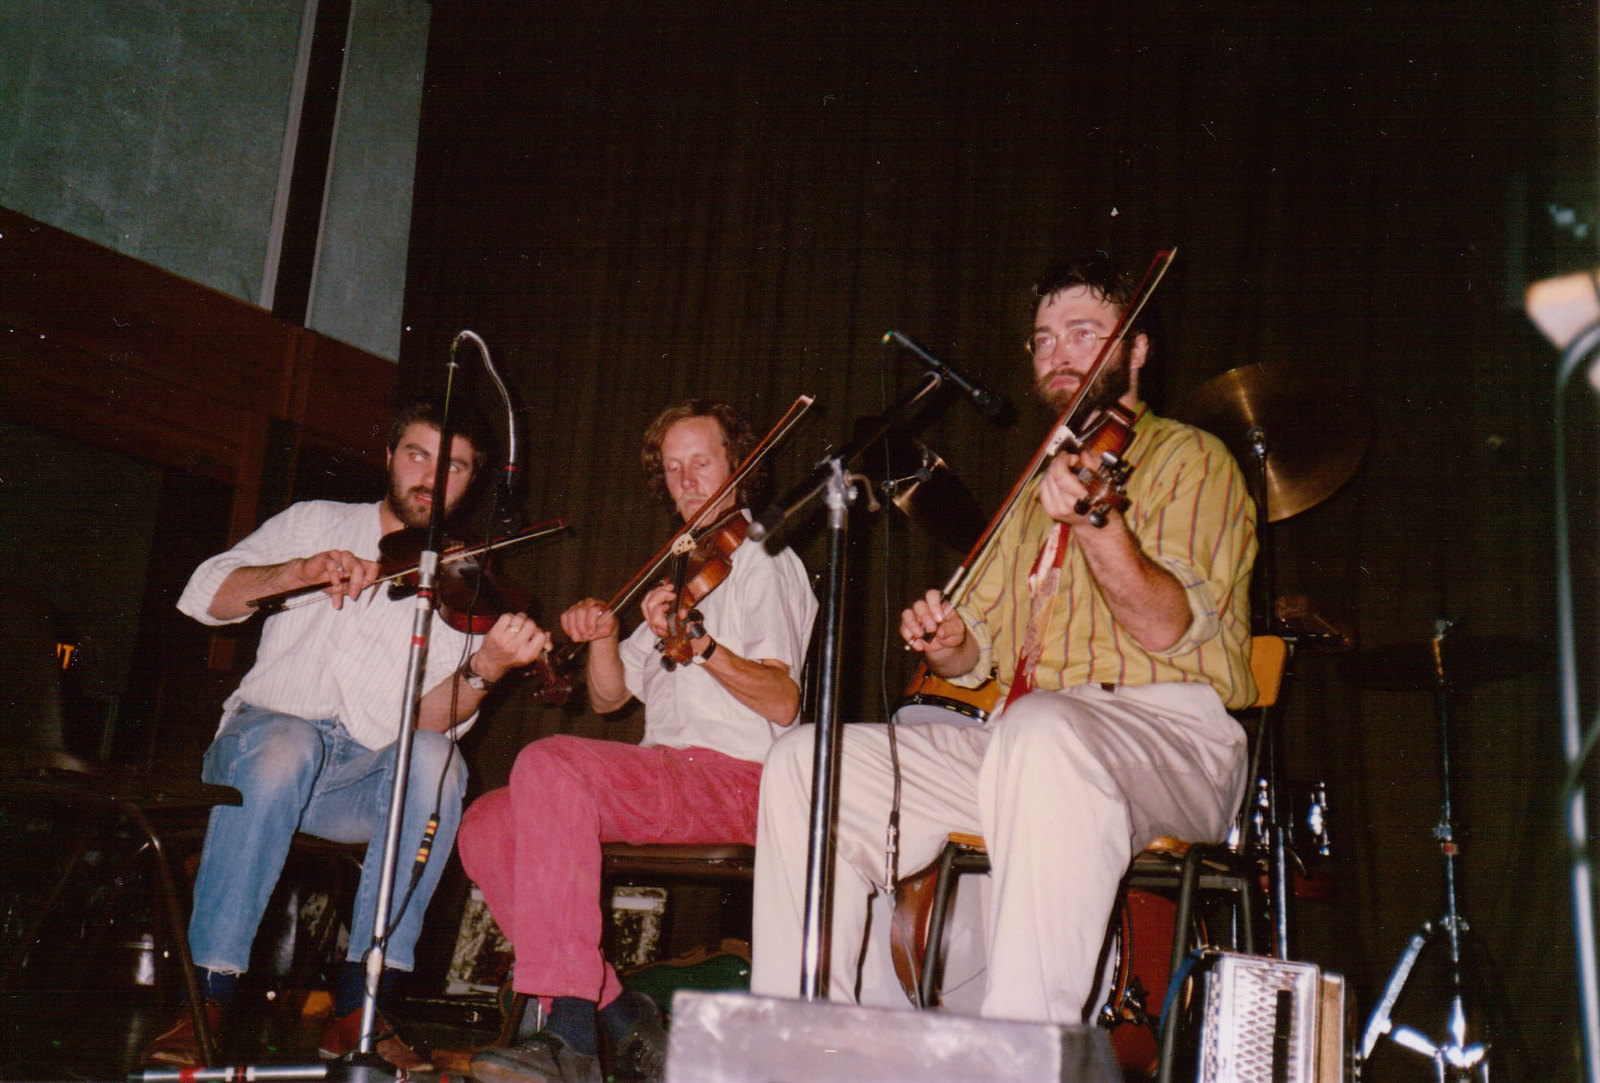 Howard Salt (right) playing at my wedding dance, with Chris Wood and Roger Claridge